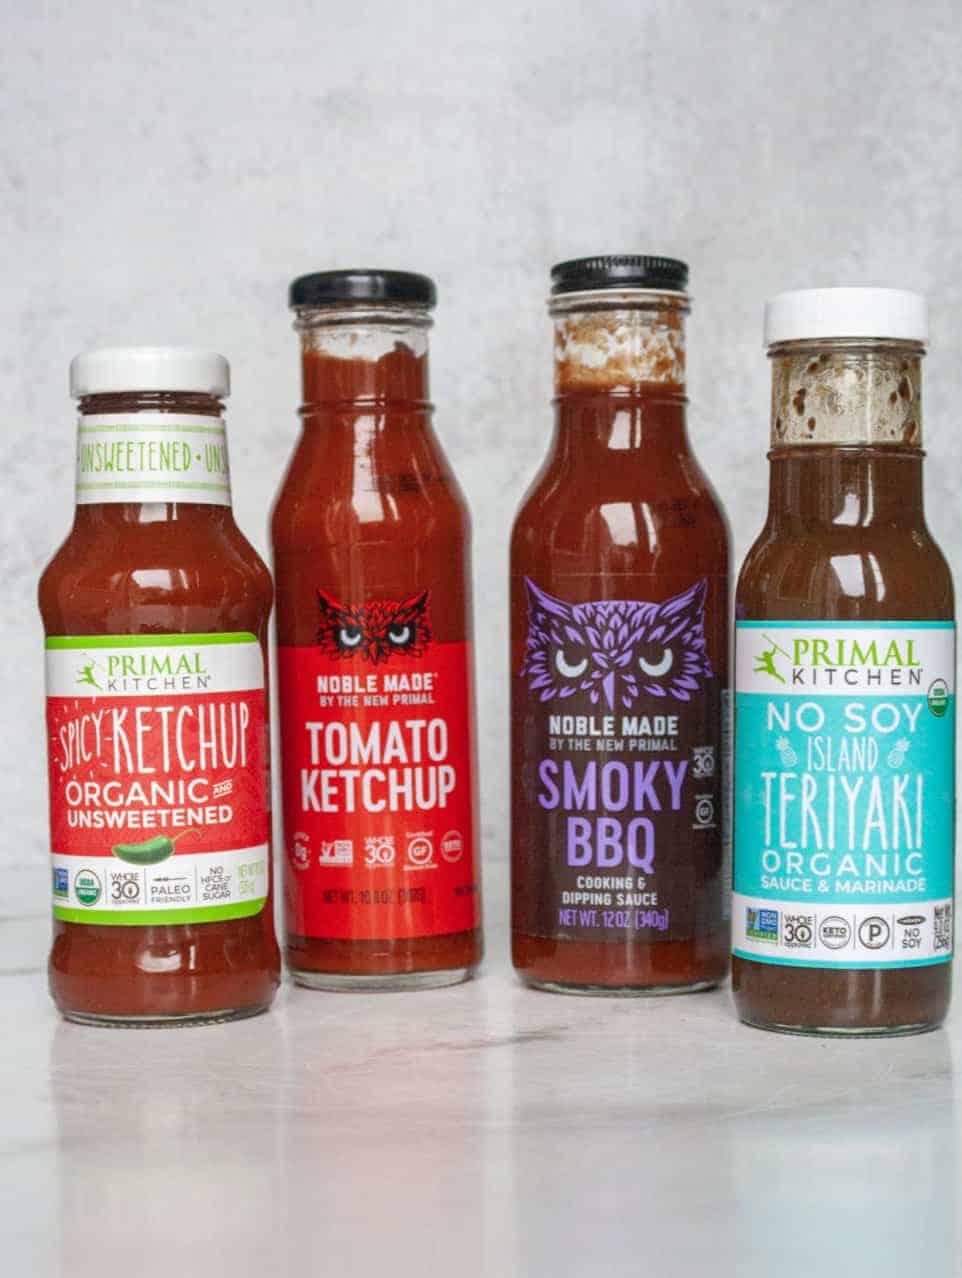 The 10 Best Primal Kitchen Products That Will Make Your Whole30 Better -  Burbank Mom